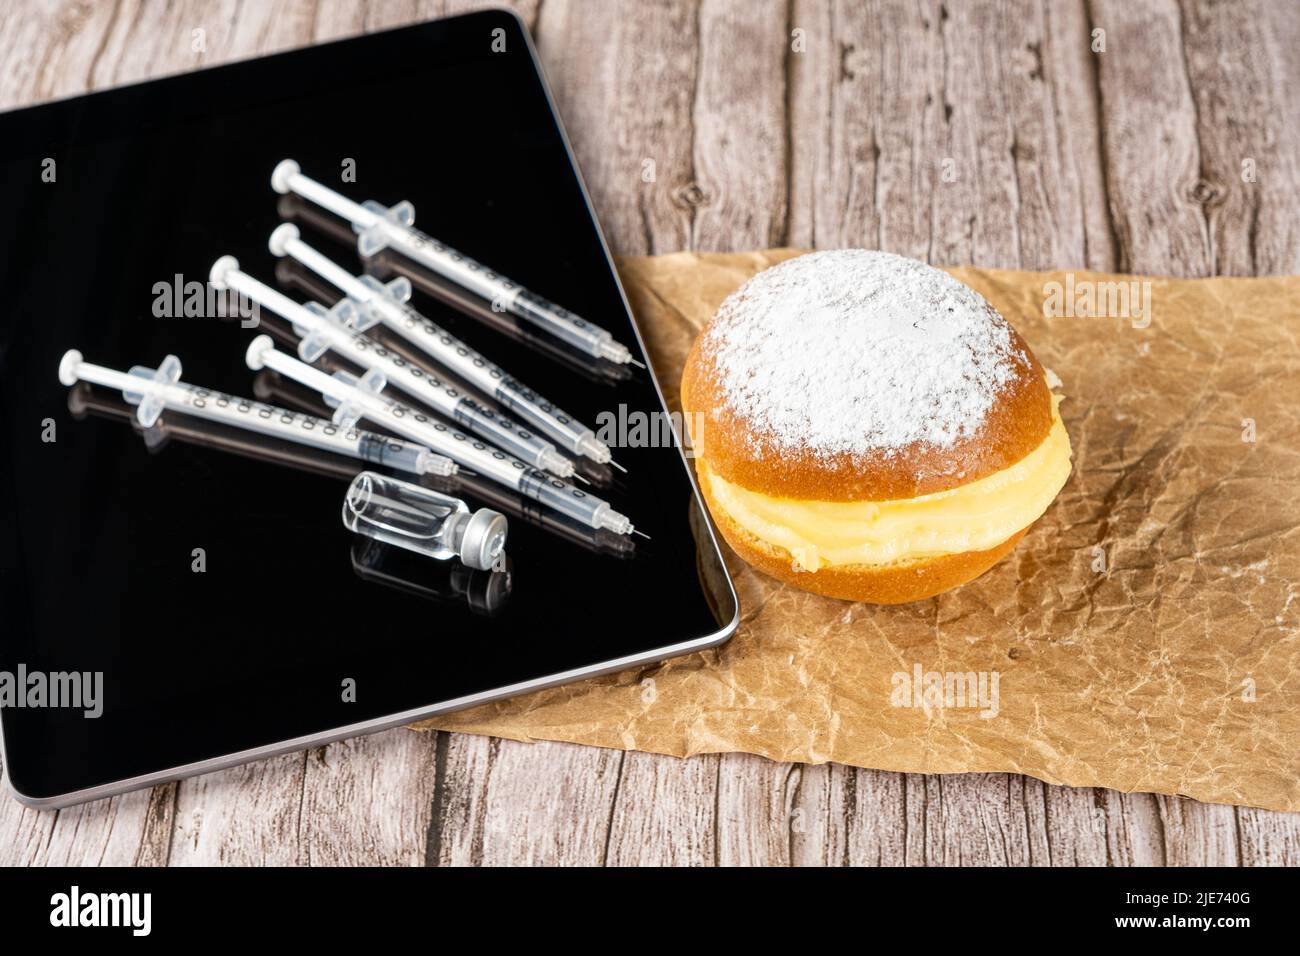 Brazilian cream doughnuts next by several syringes and ampoules with insulin on the tablet. Stock Photo